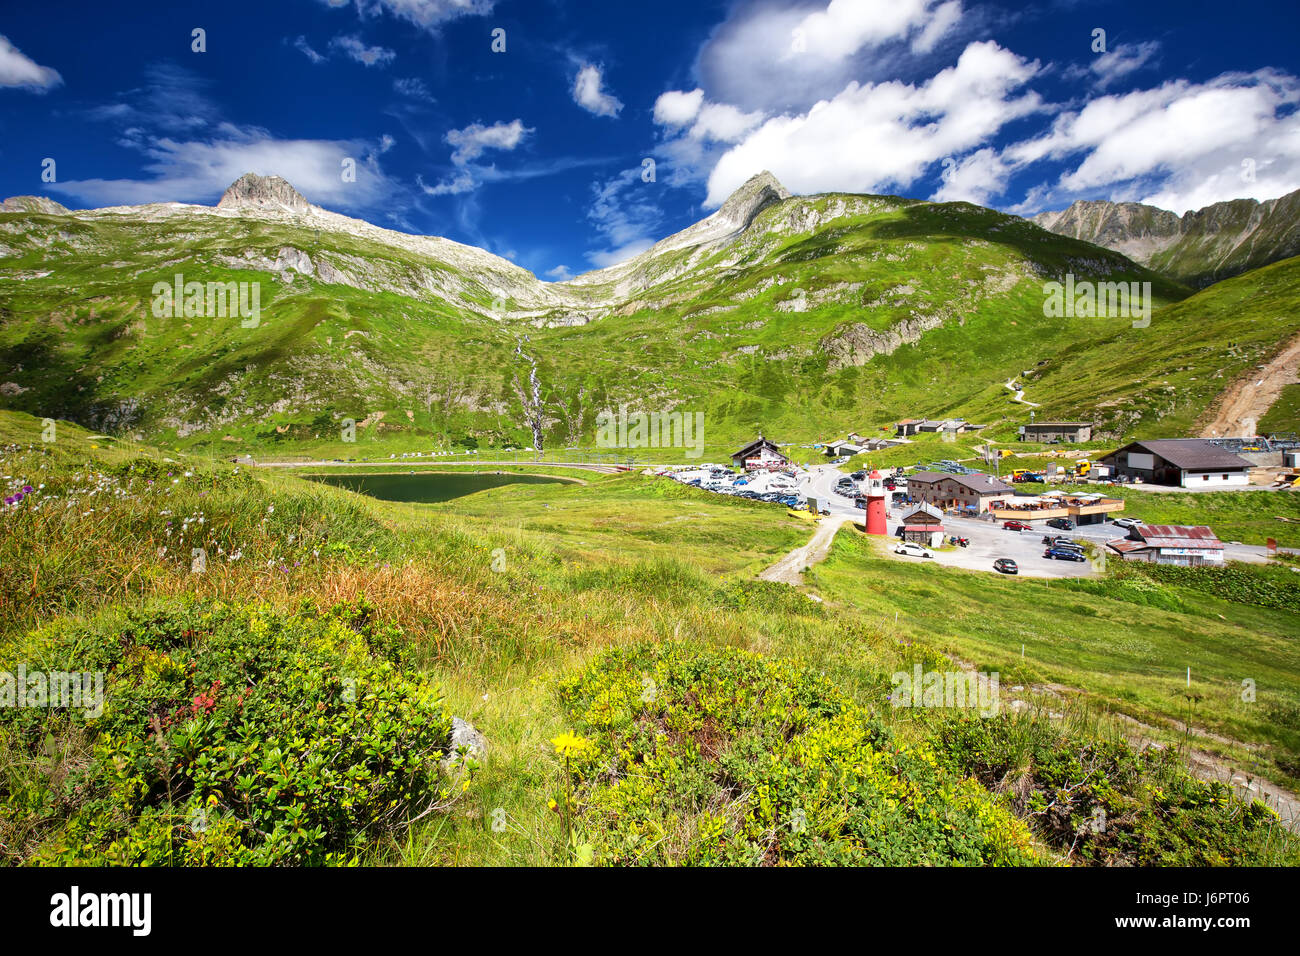 Top of the Oberalpass surrounded by waterfall, Oberalpsee and Swiss Alps, Switzerland. Stock Photo